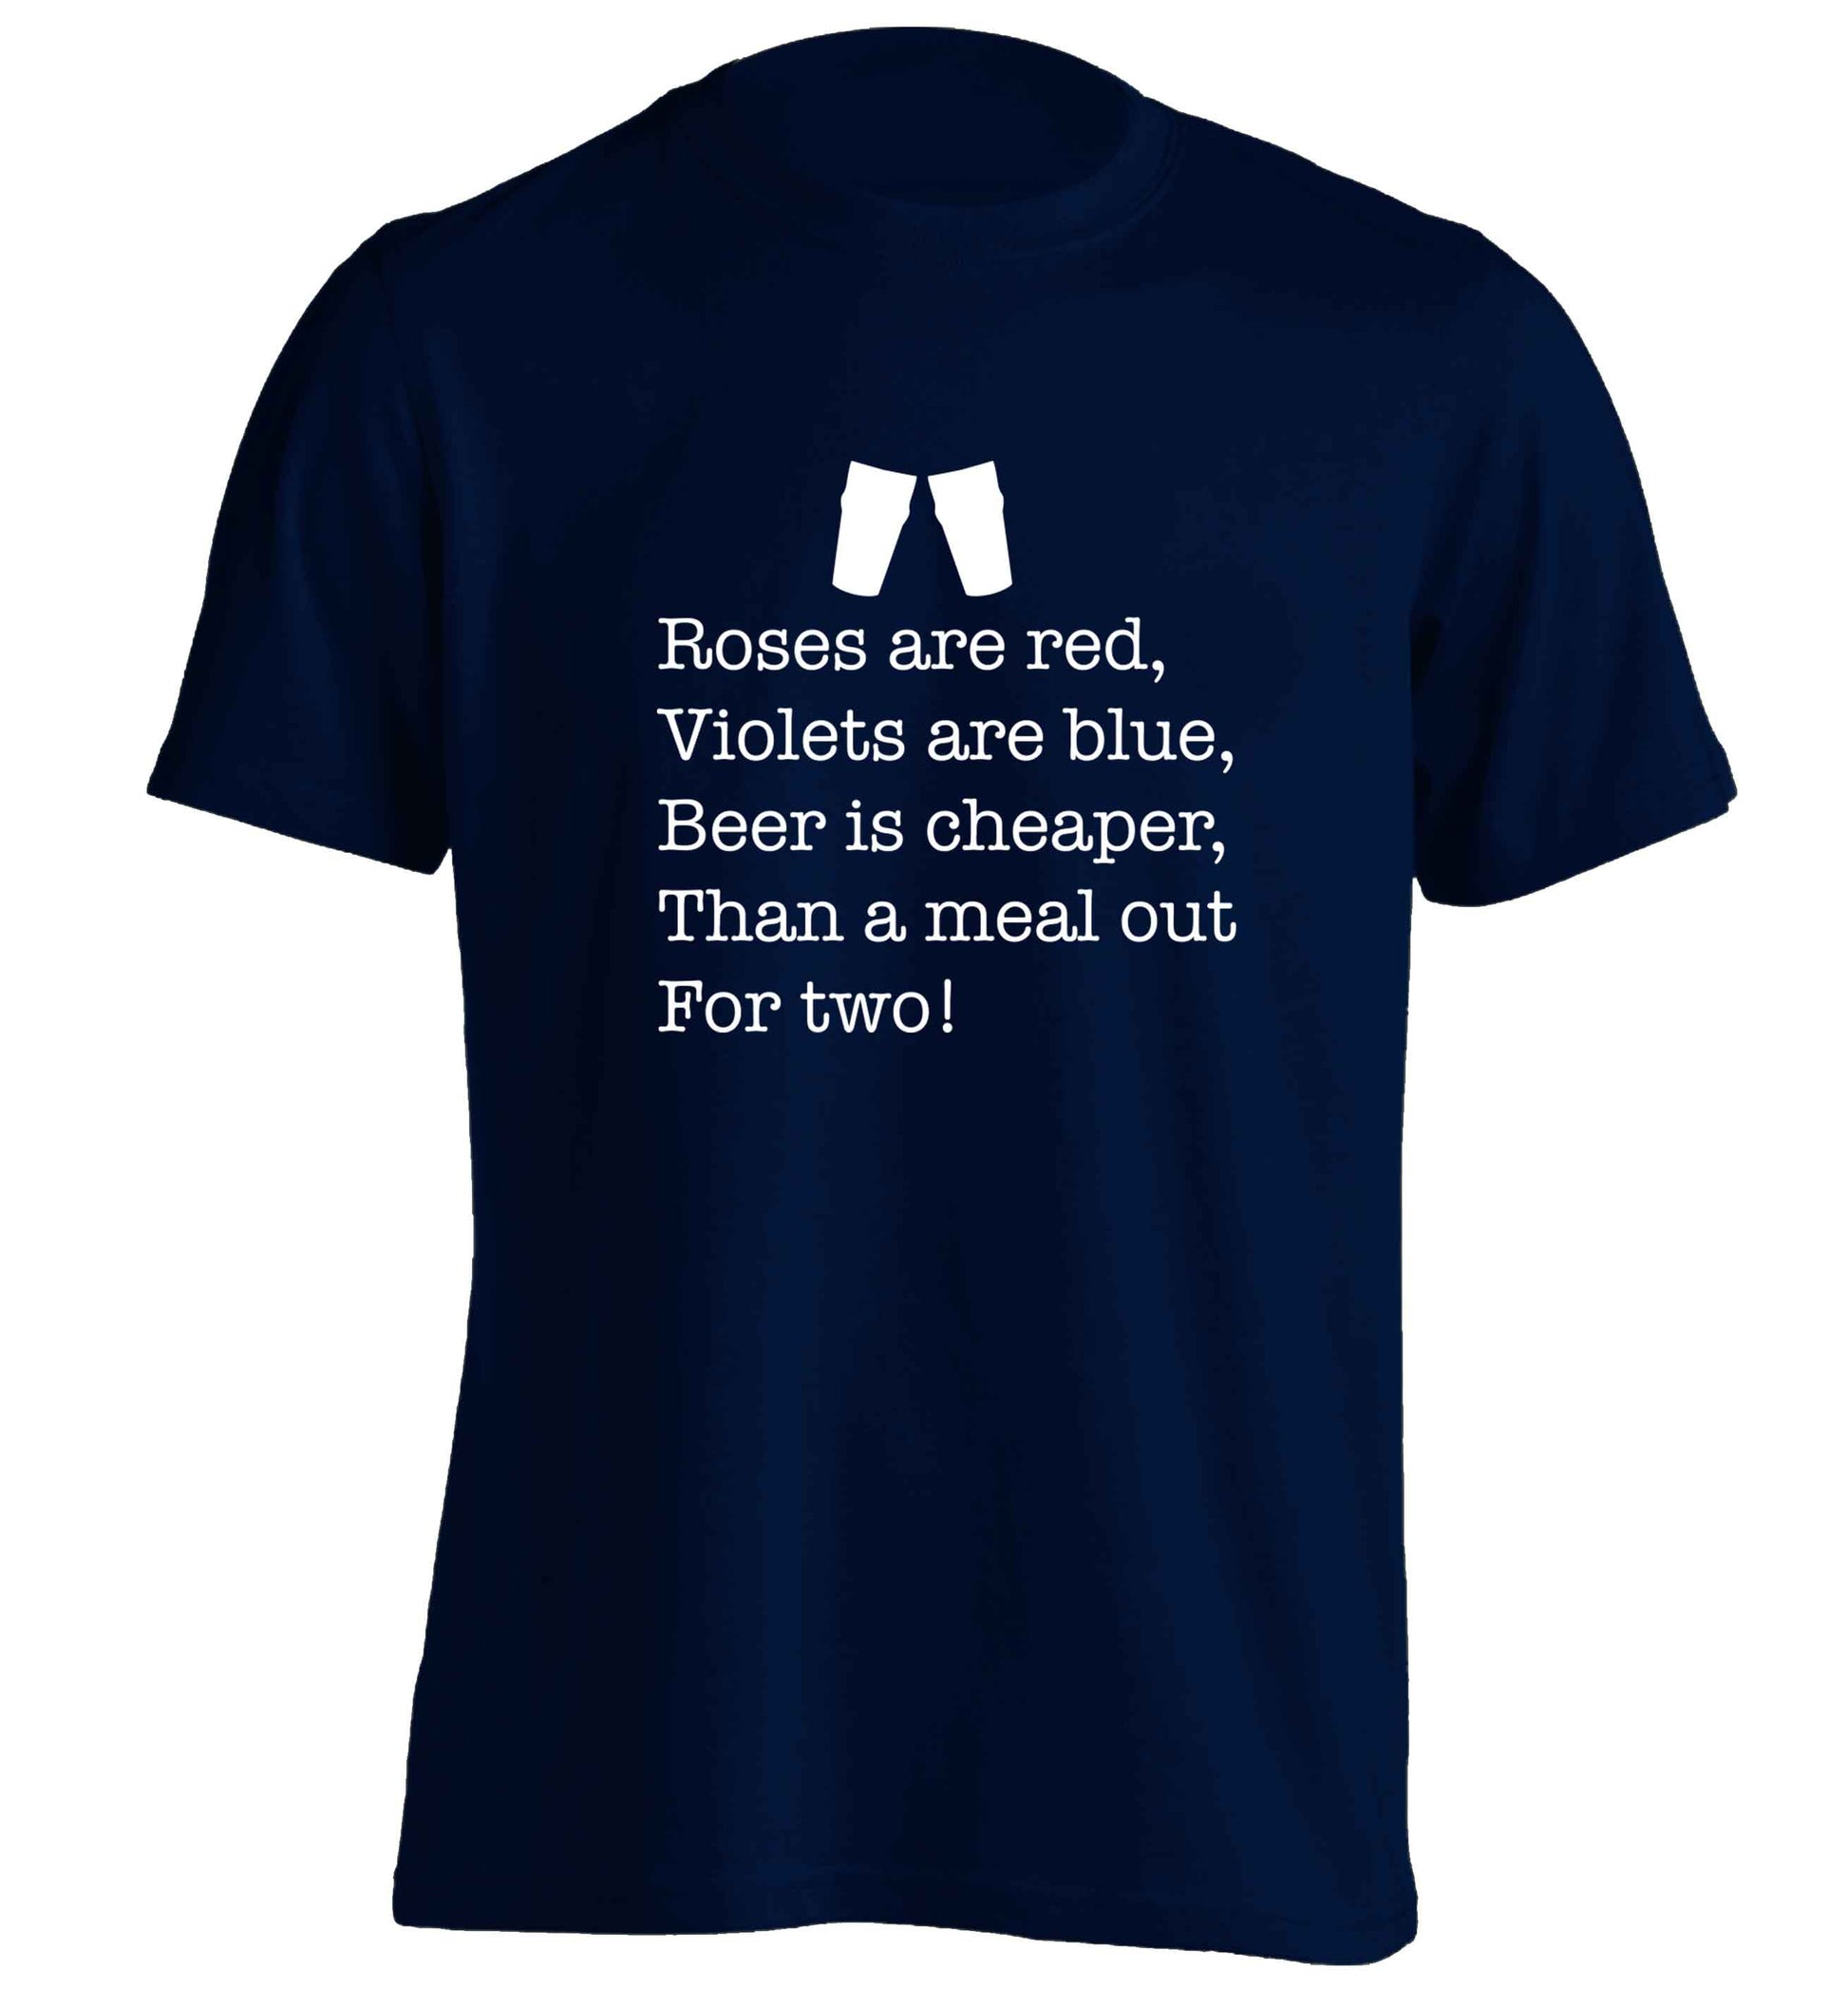 Roses are red violets are blue beer is cheaper than a meal out for two adults unisex navy Tshirt 2XL